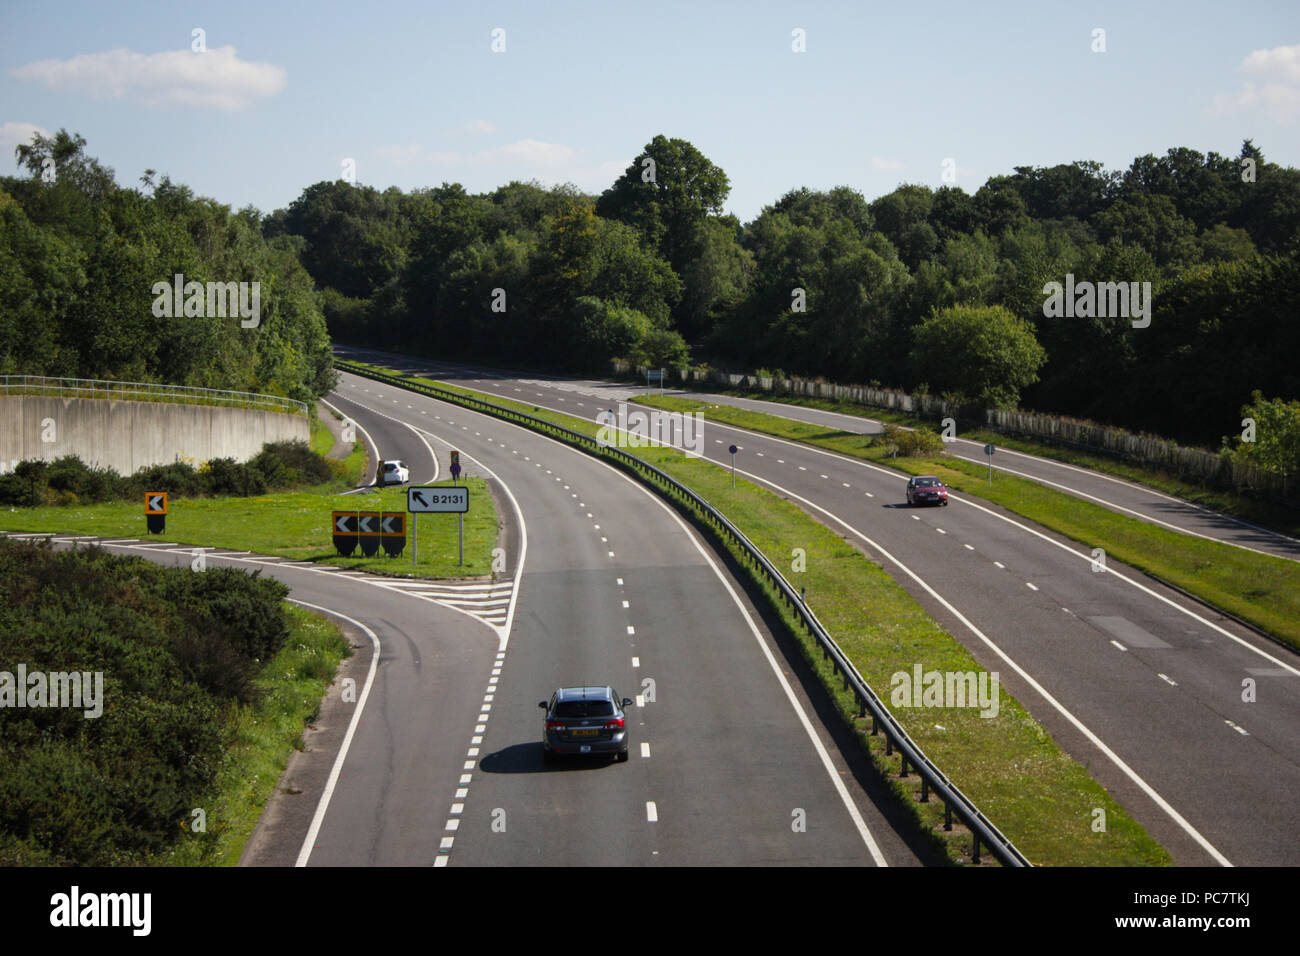 Light traffic on the A3 dual carriageway in Hampshire, England Stock Photo